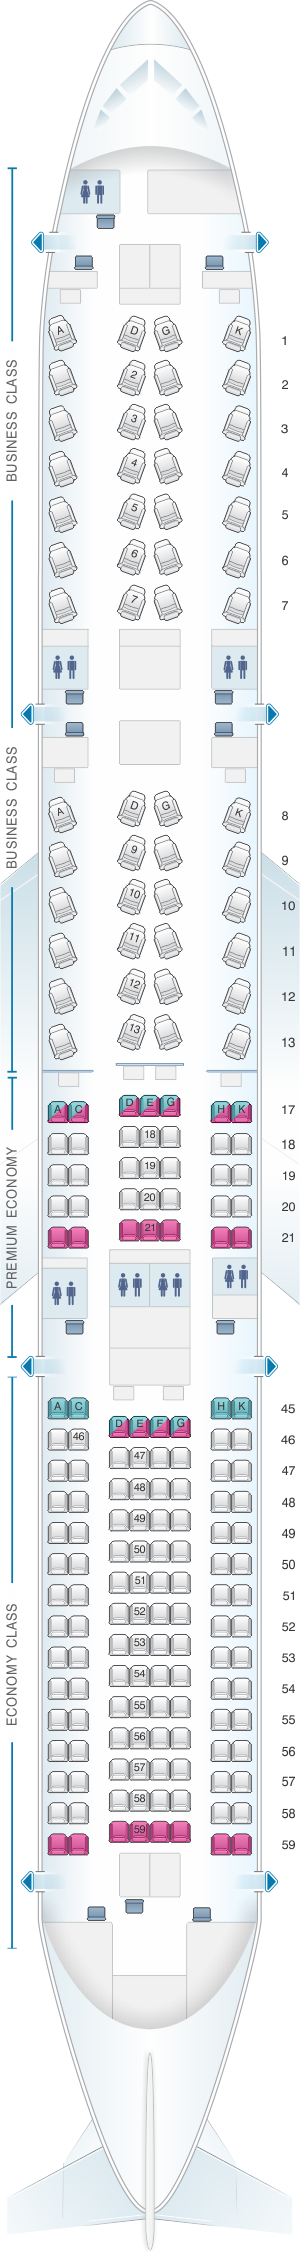 Seat map for Japan Airlines (JAL) Boeing B787-9 E91